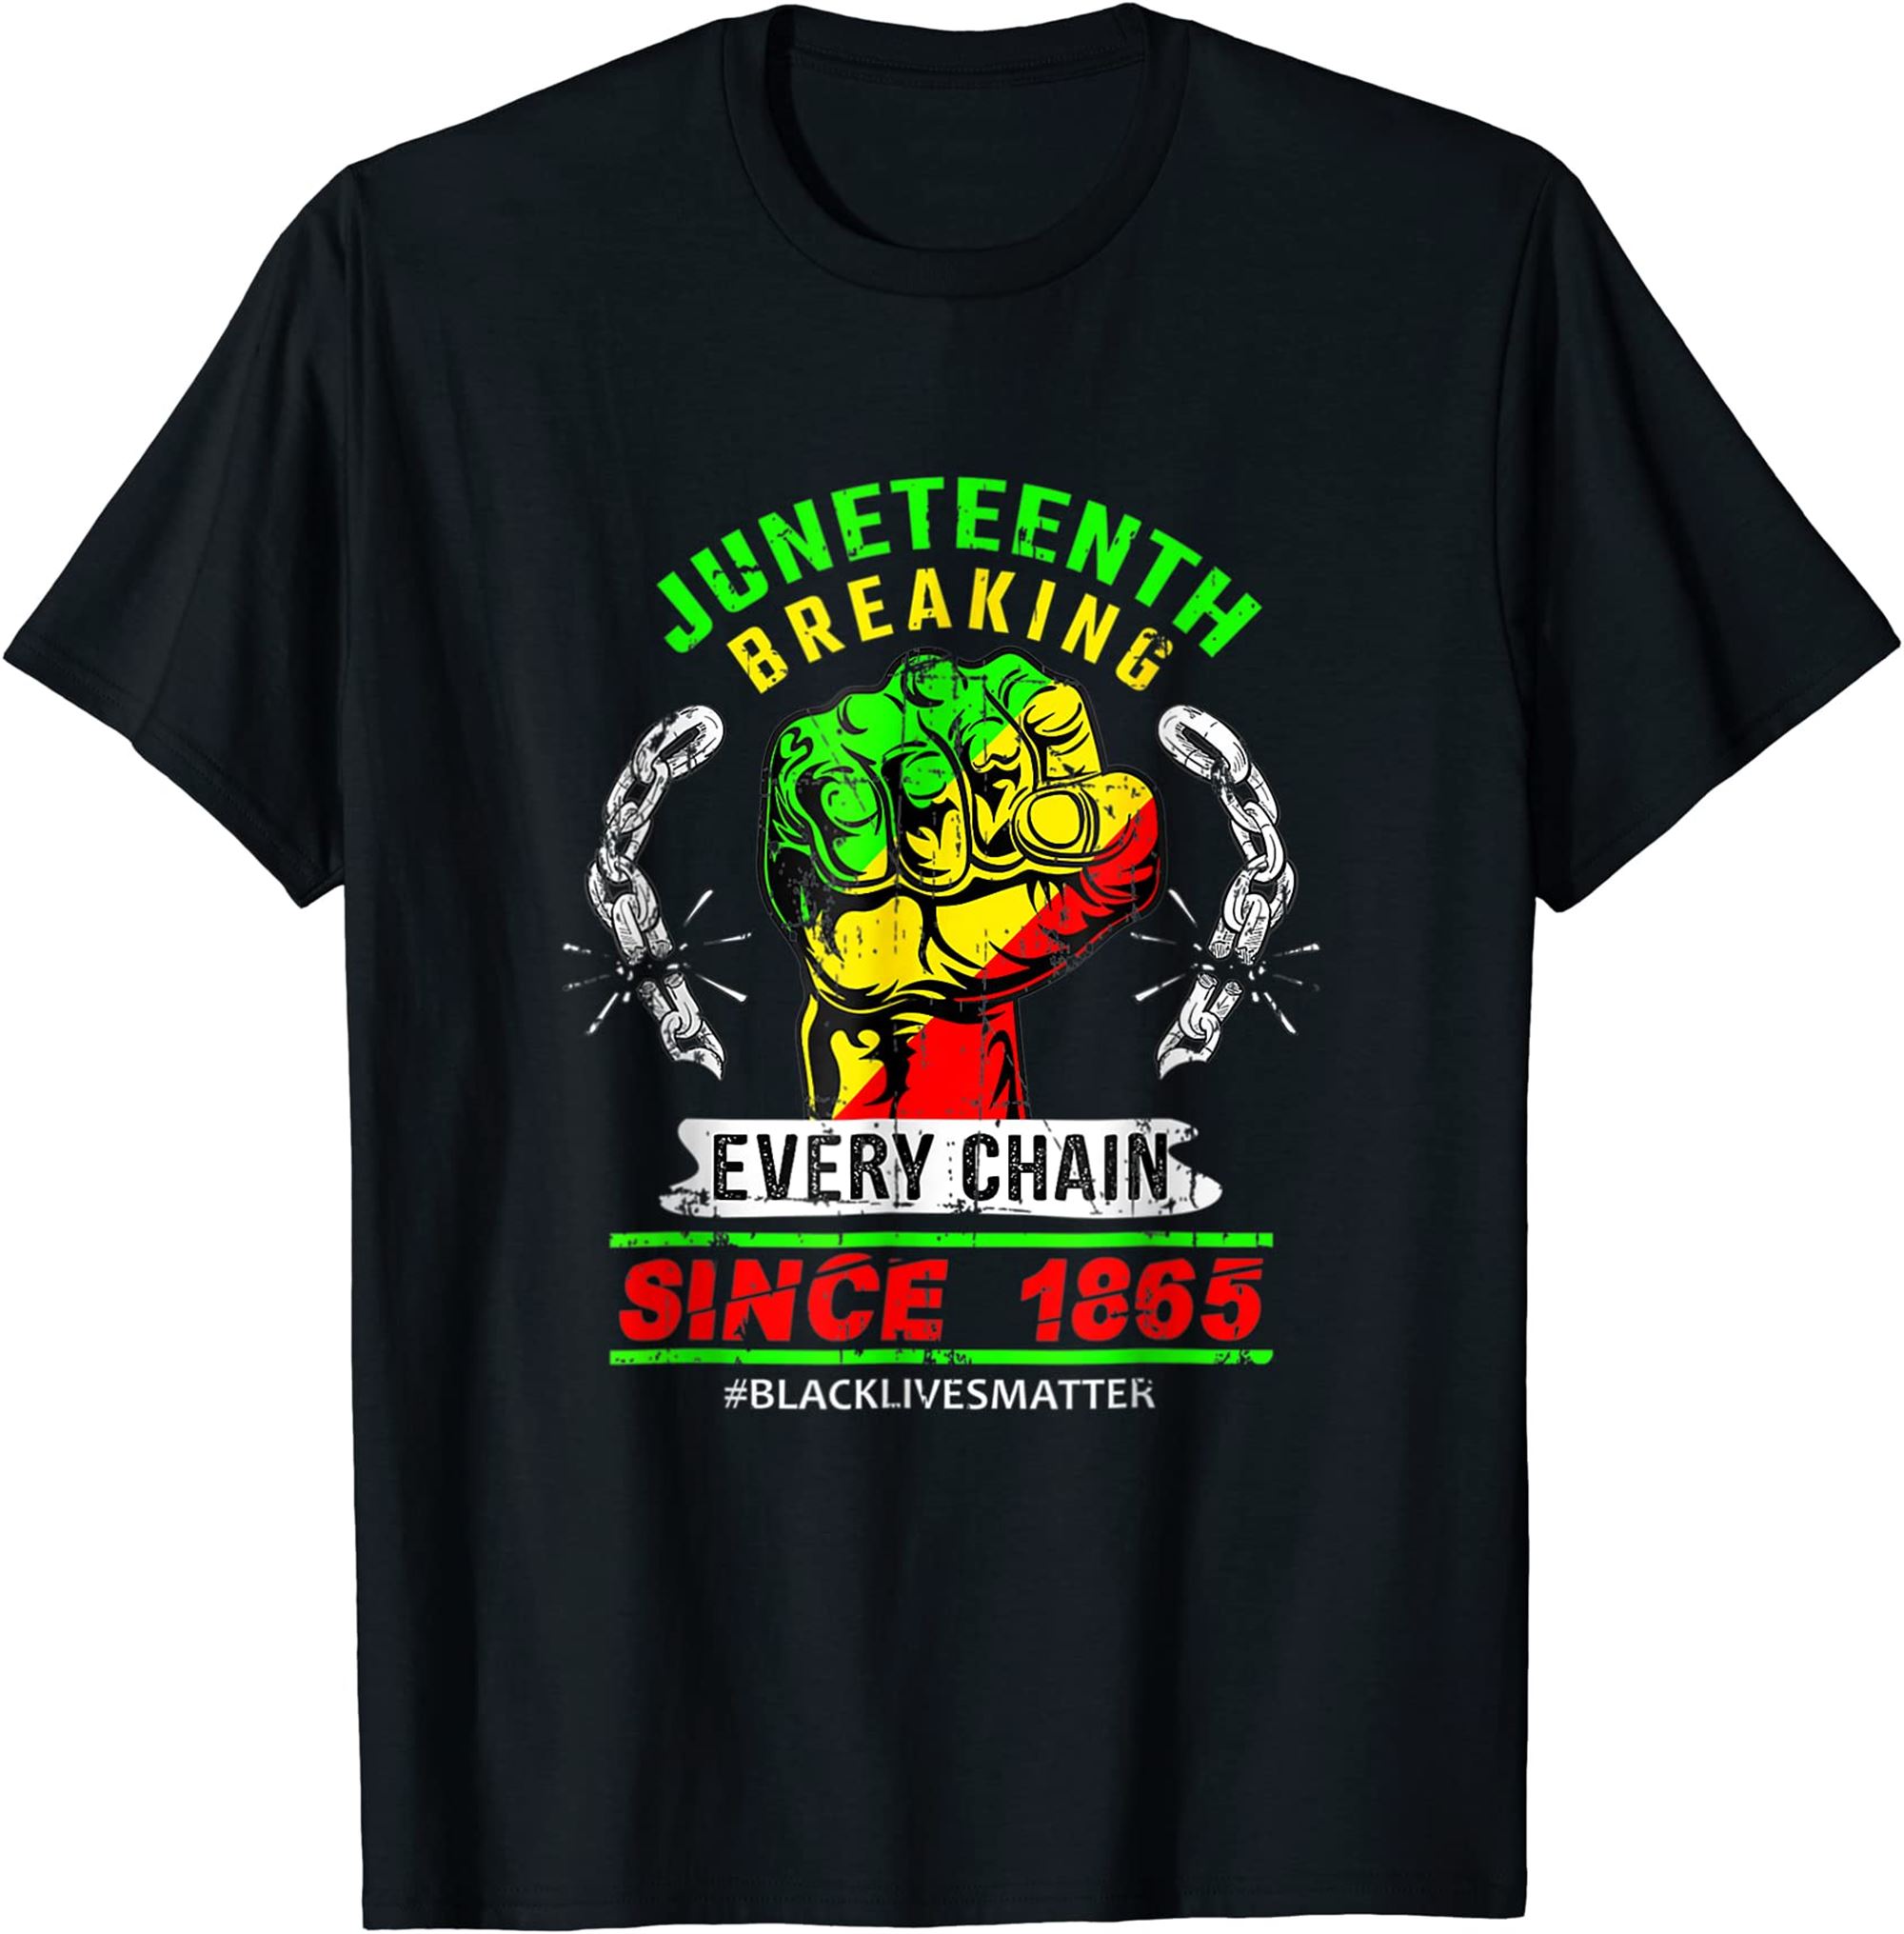 Juneteenth Breaking Every Chain Since 1865 Fist Blm Freedom T-shirt Plus Size Up To 5xl